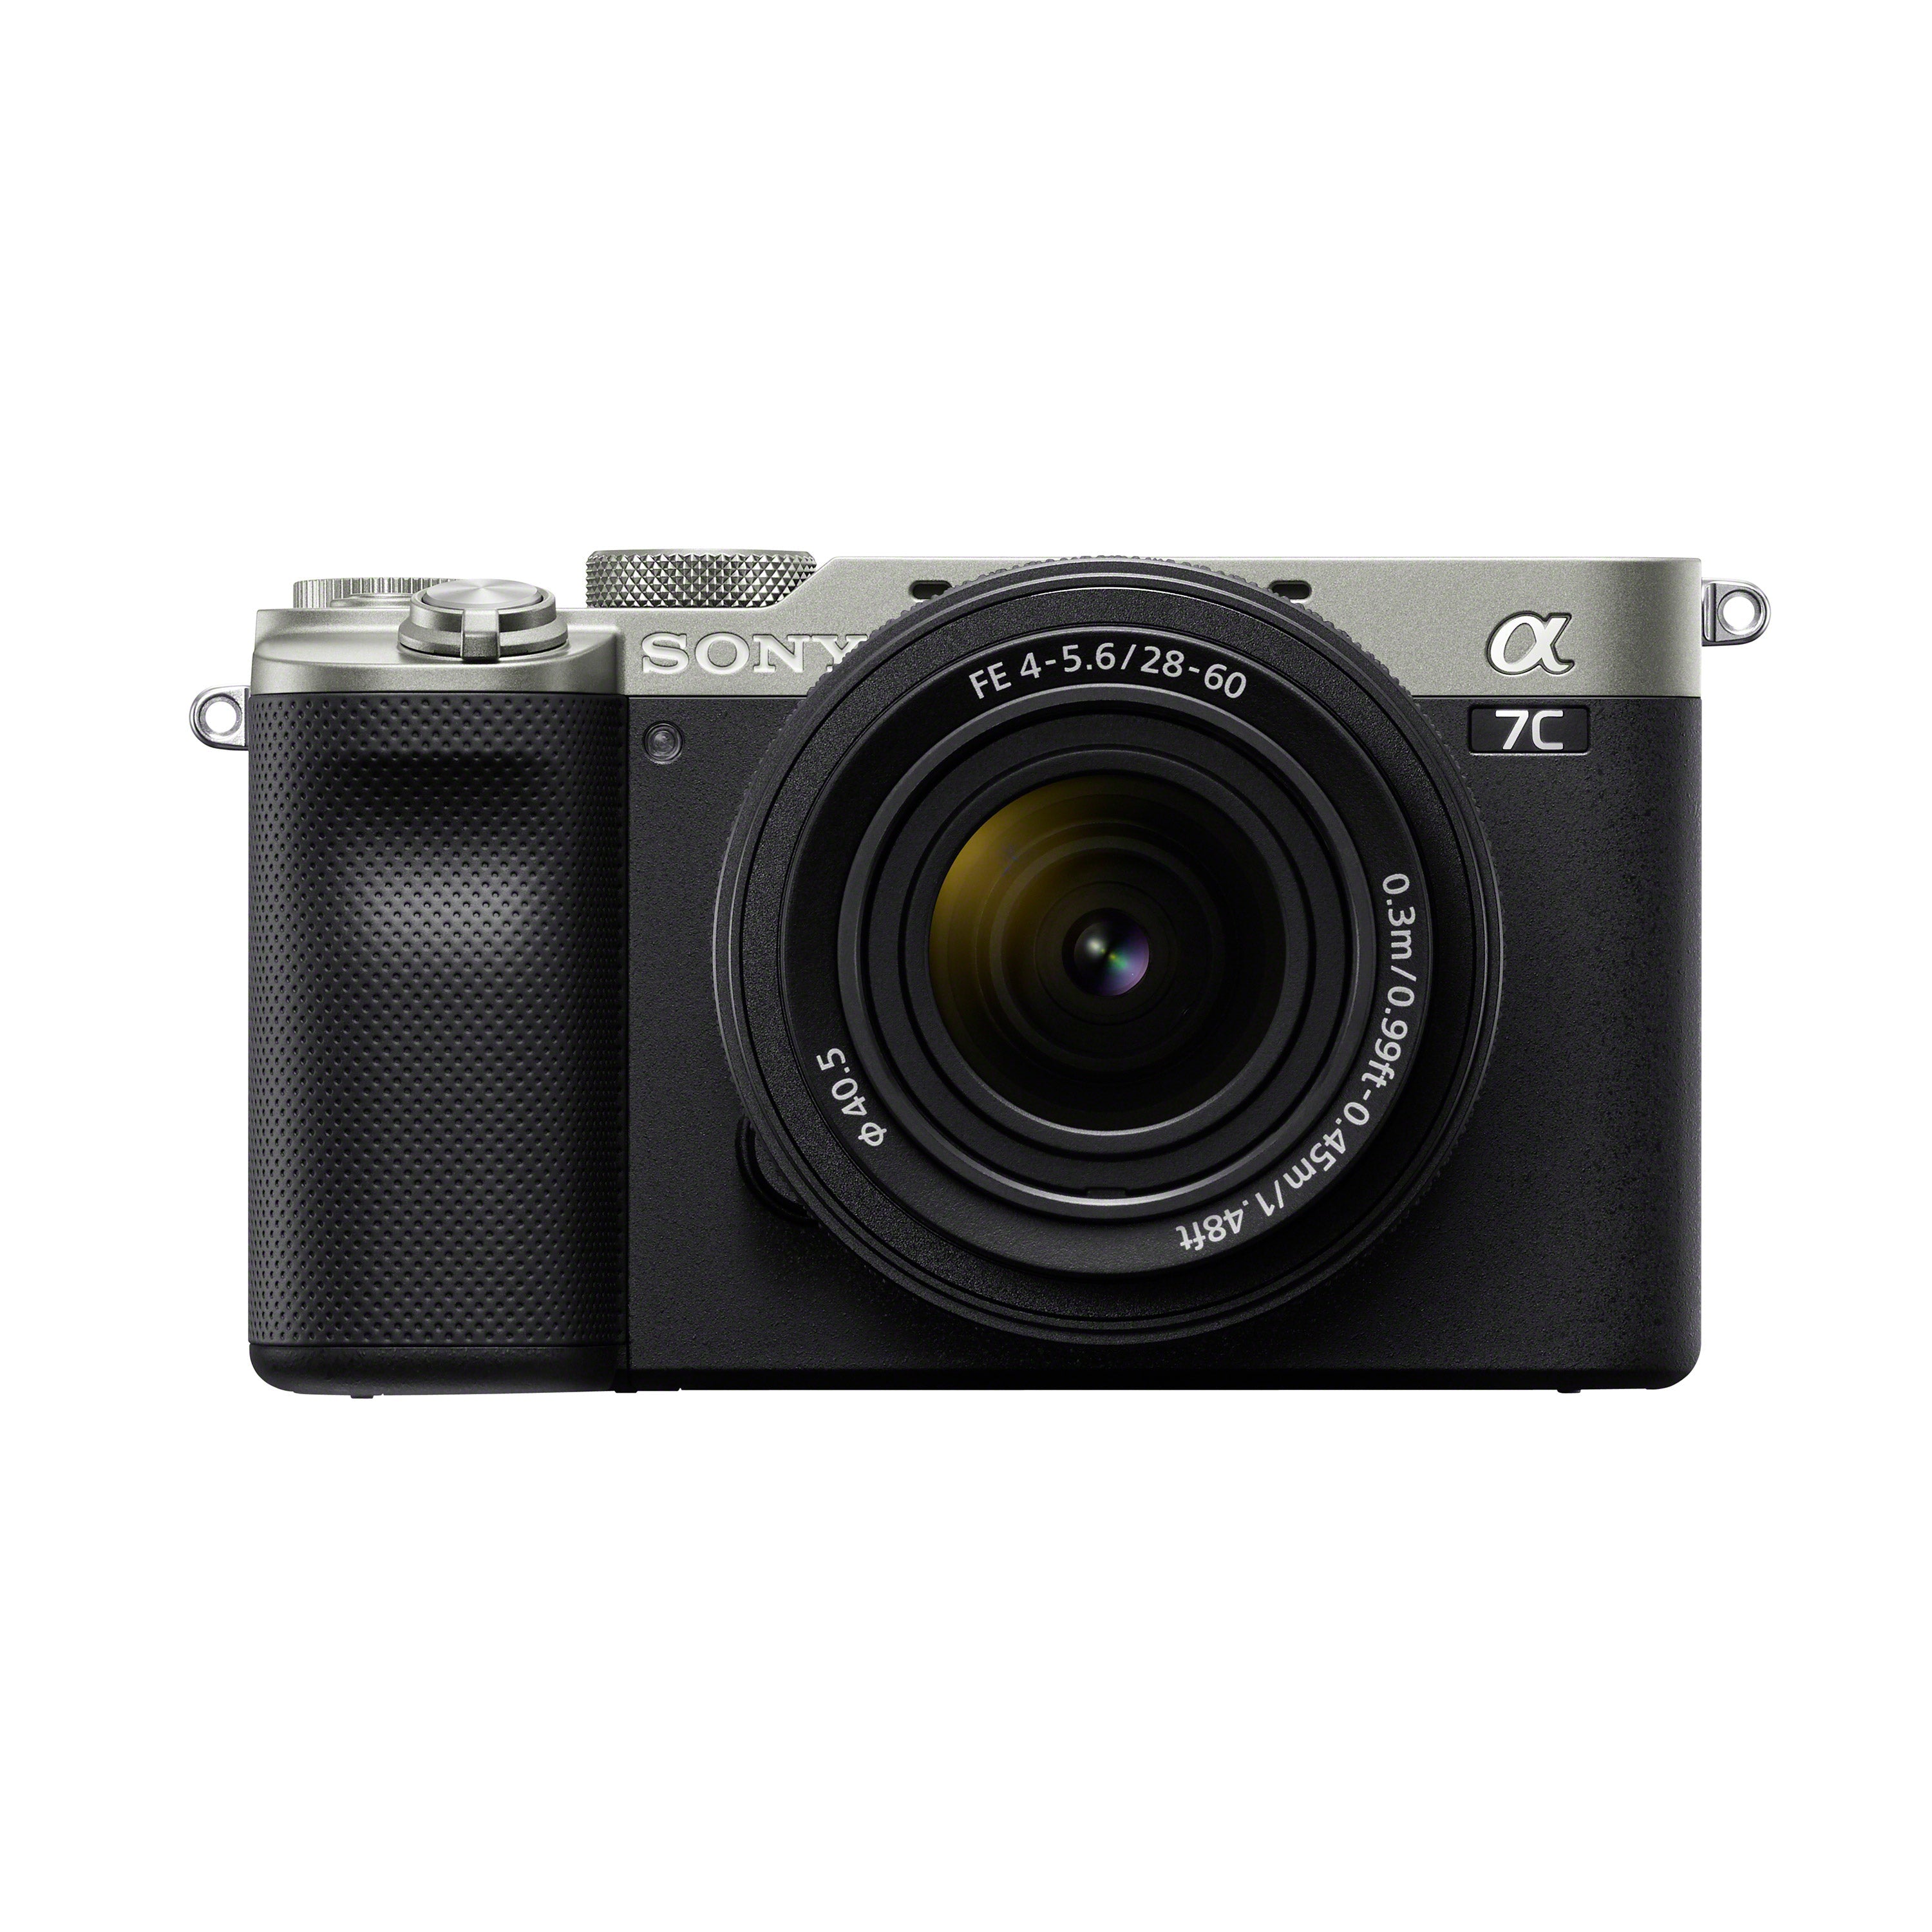 Sony a7C Compact full-frame camera with 28-60mm Lens (Silver)